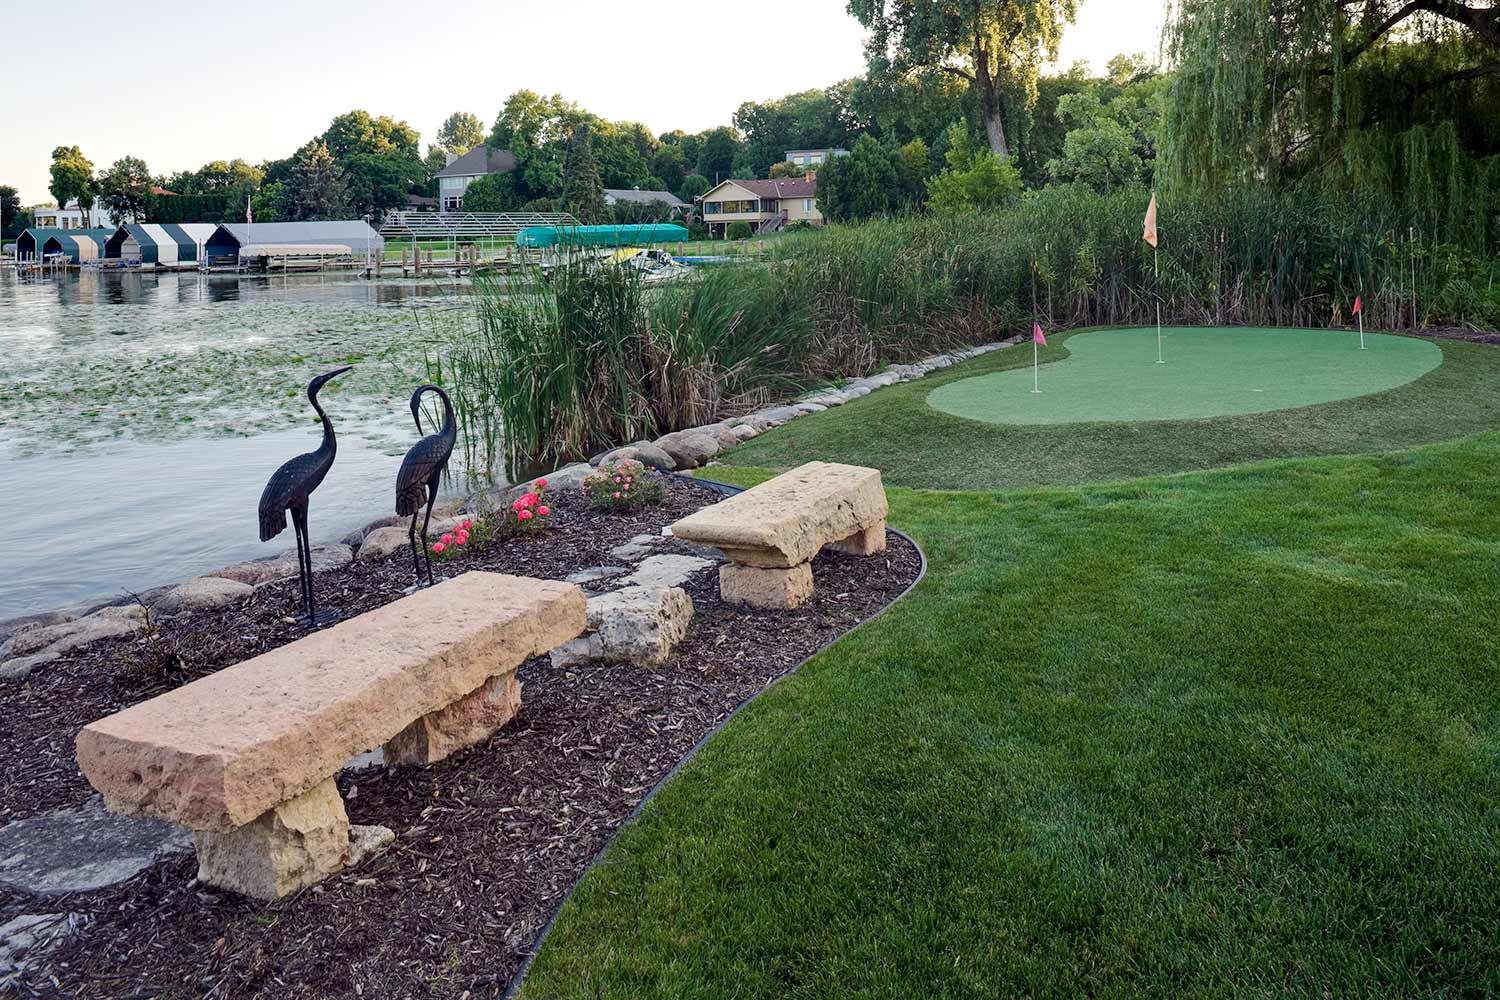 stone benches and putting green overlooking lake minnetonka